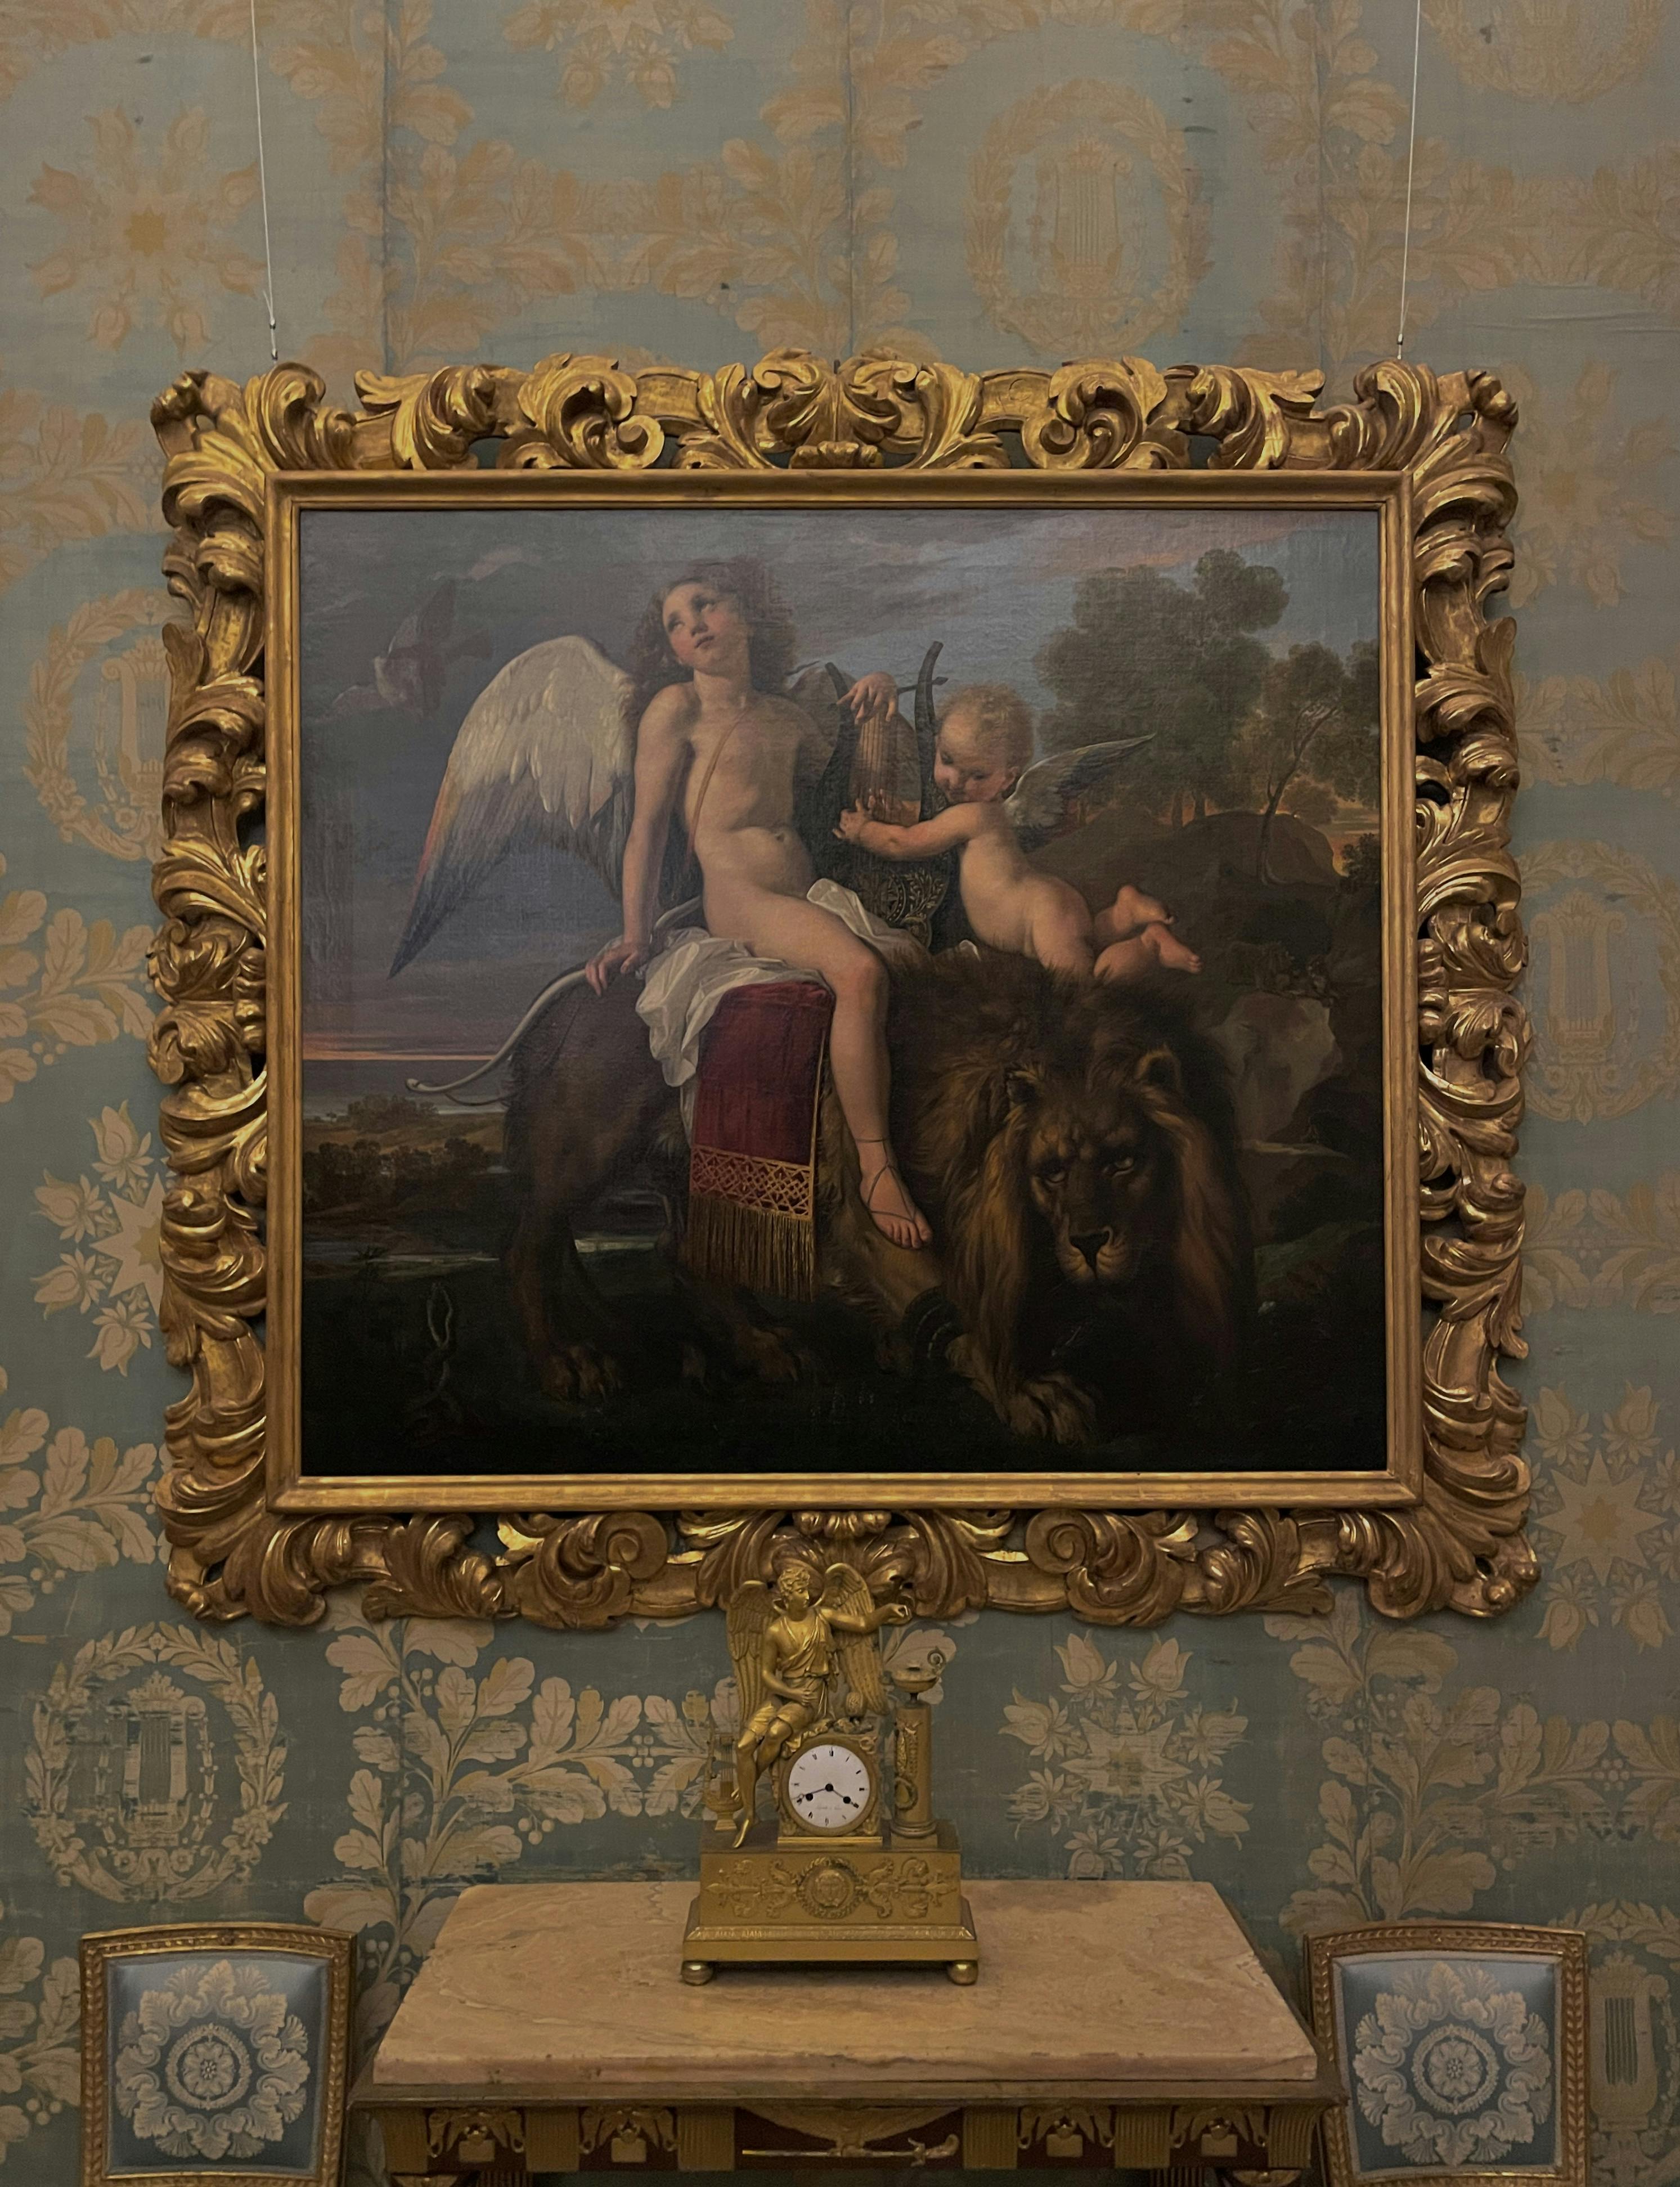 11 new 19th century works for the Pitti Palace Gallery of Modern Art